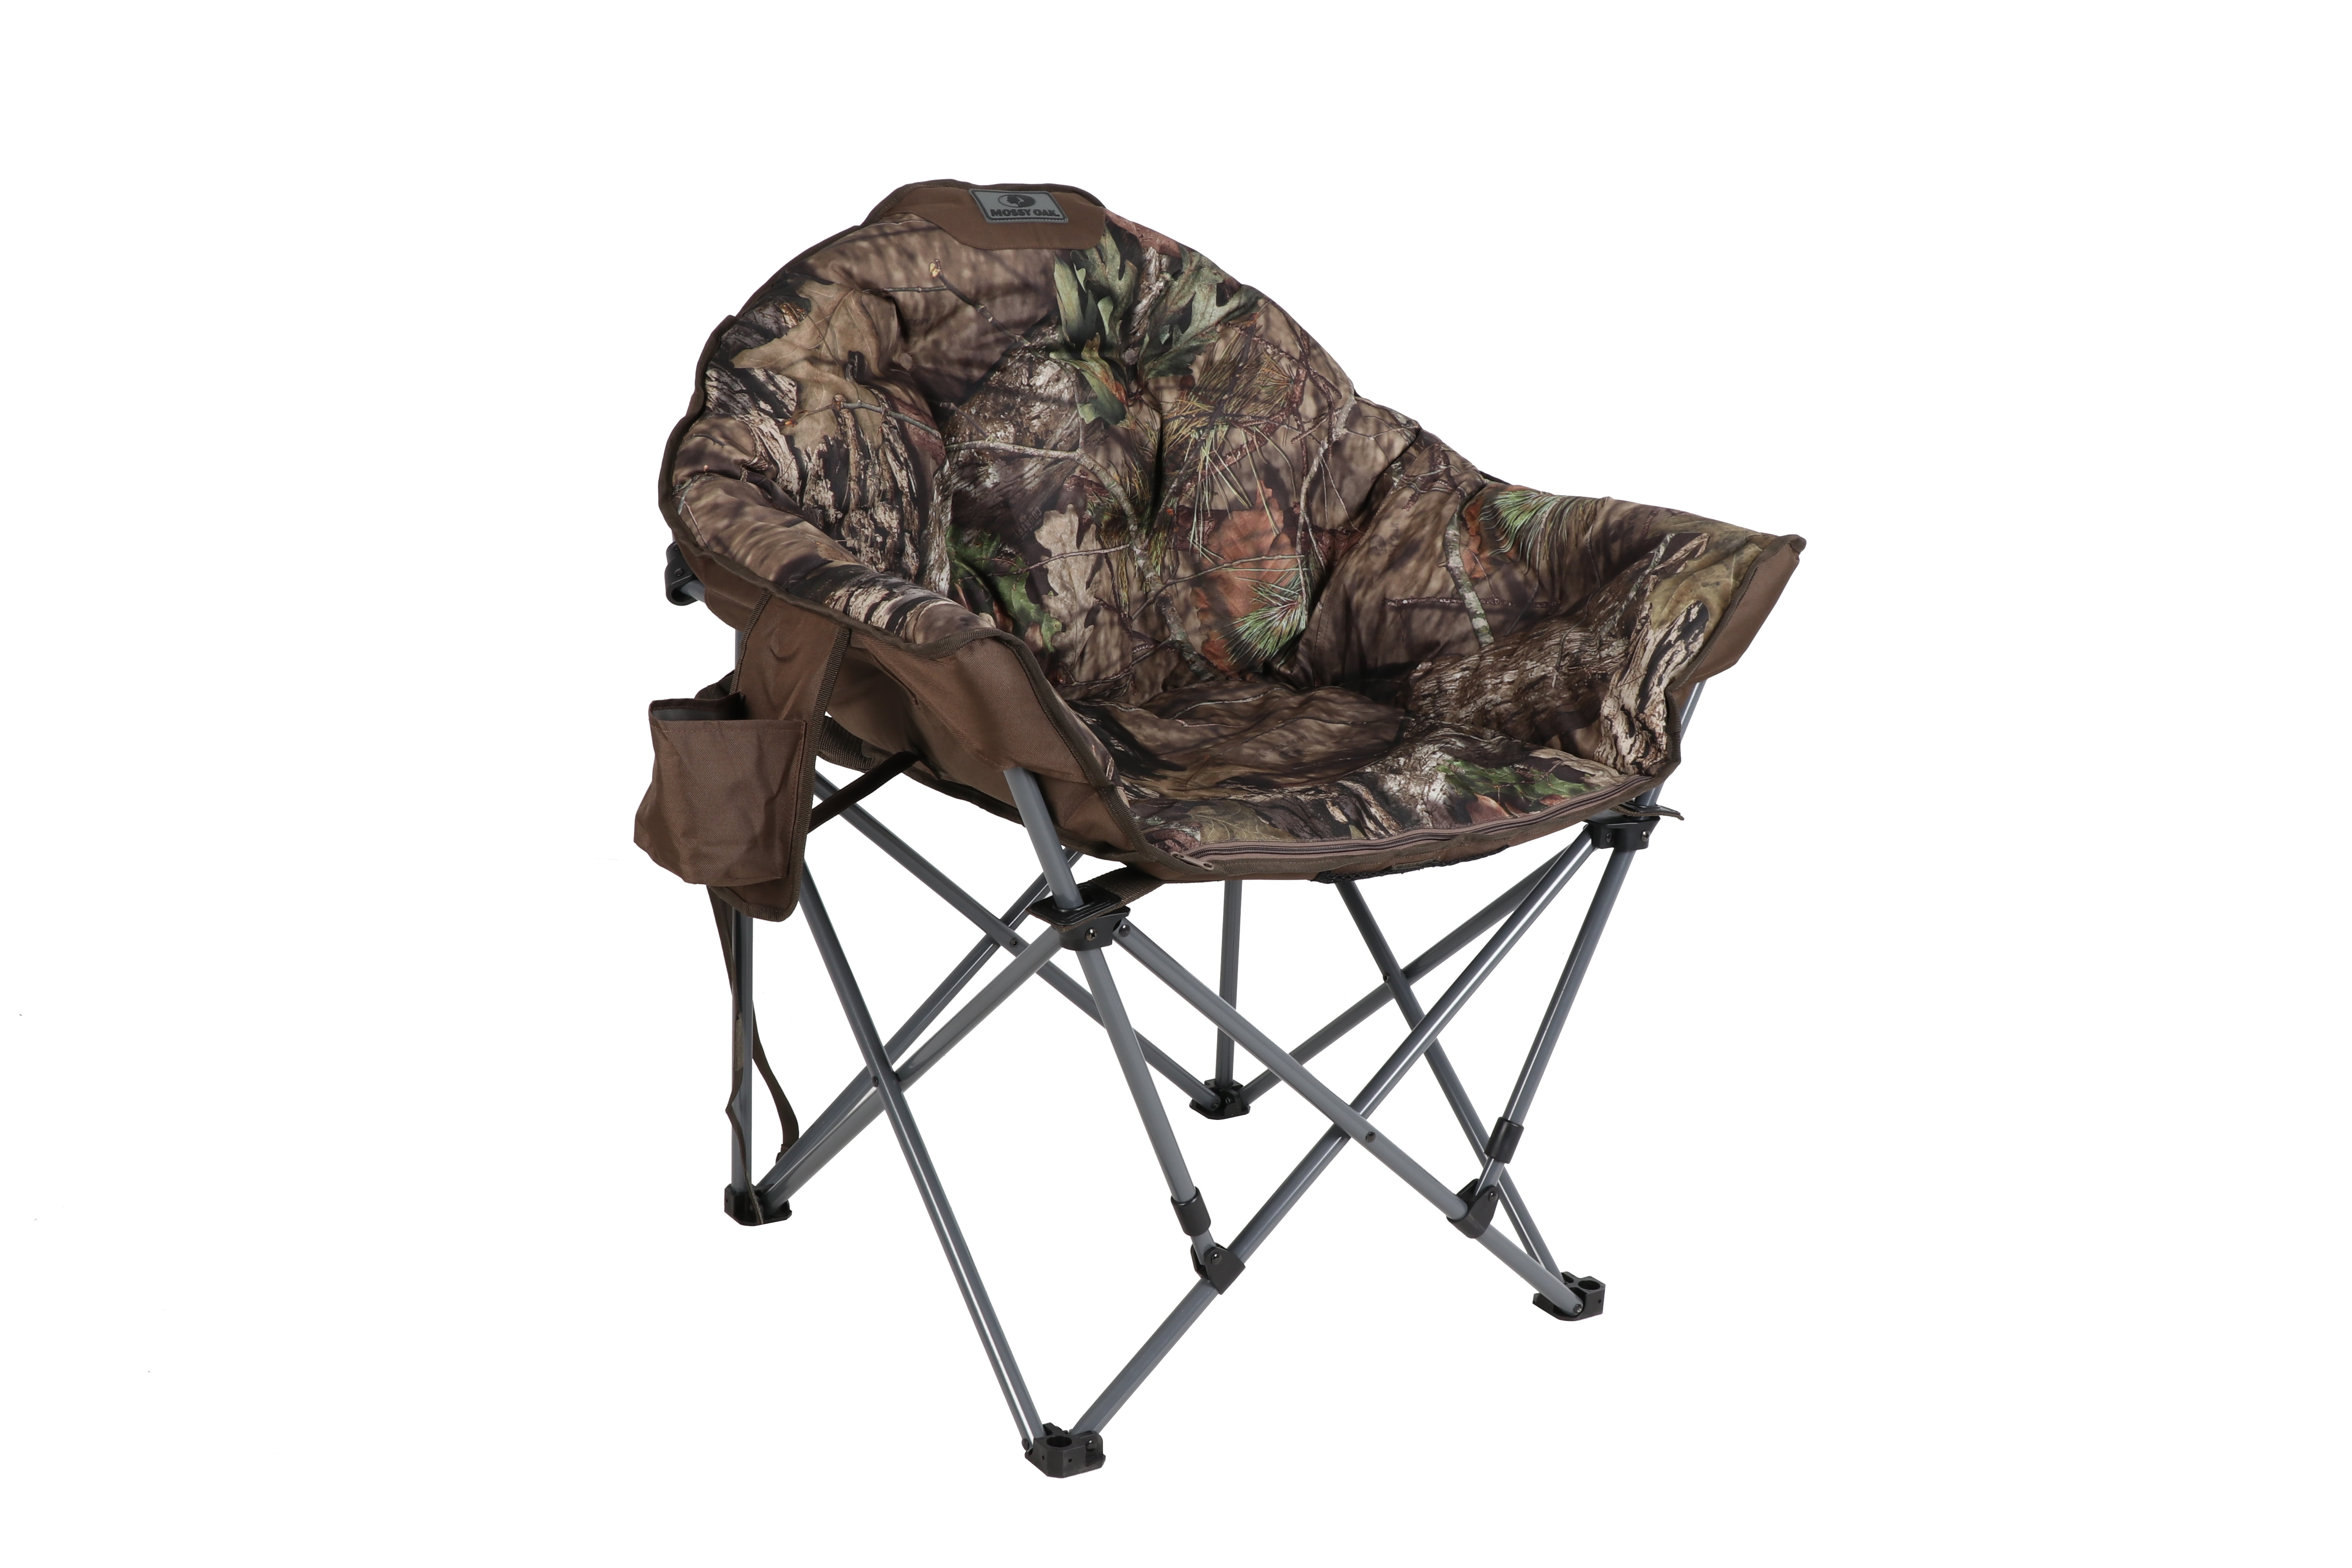 Low Profile Hunting Chair Mossy Oak Camo Portable Folding Camping Hiking Seat 